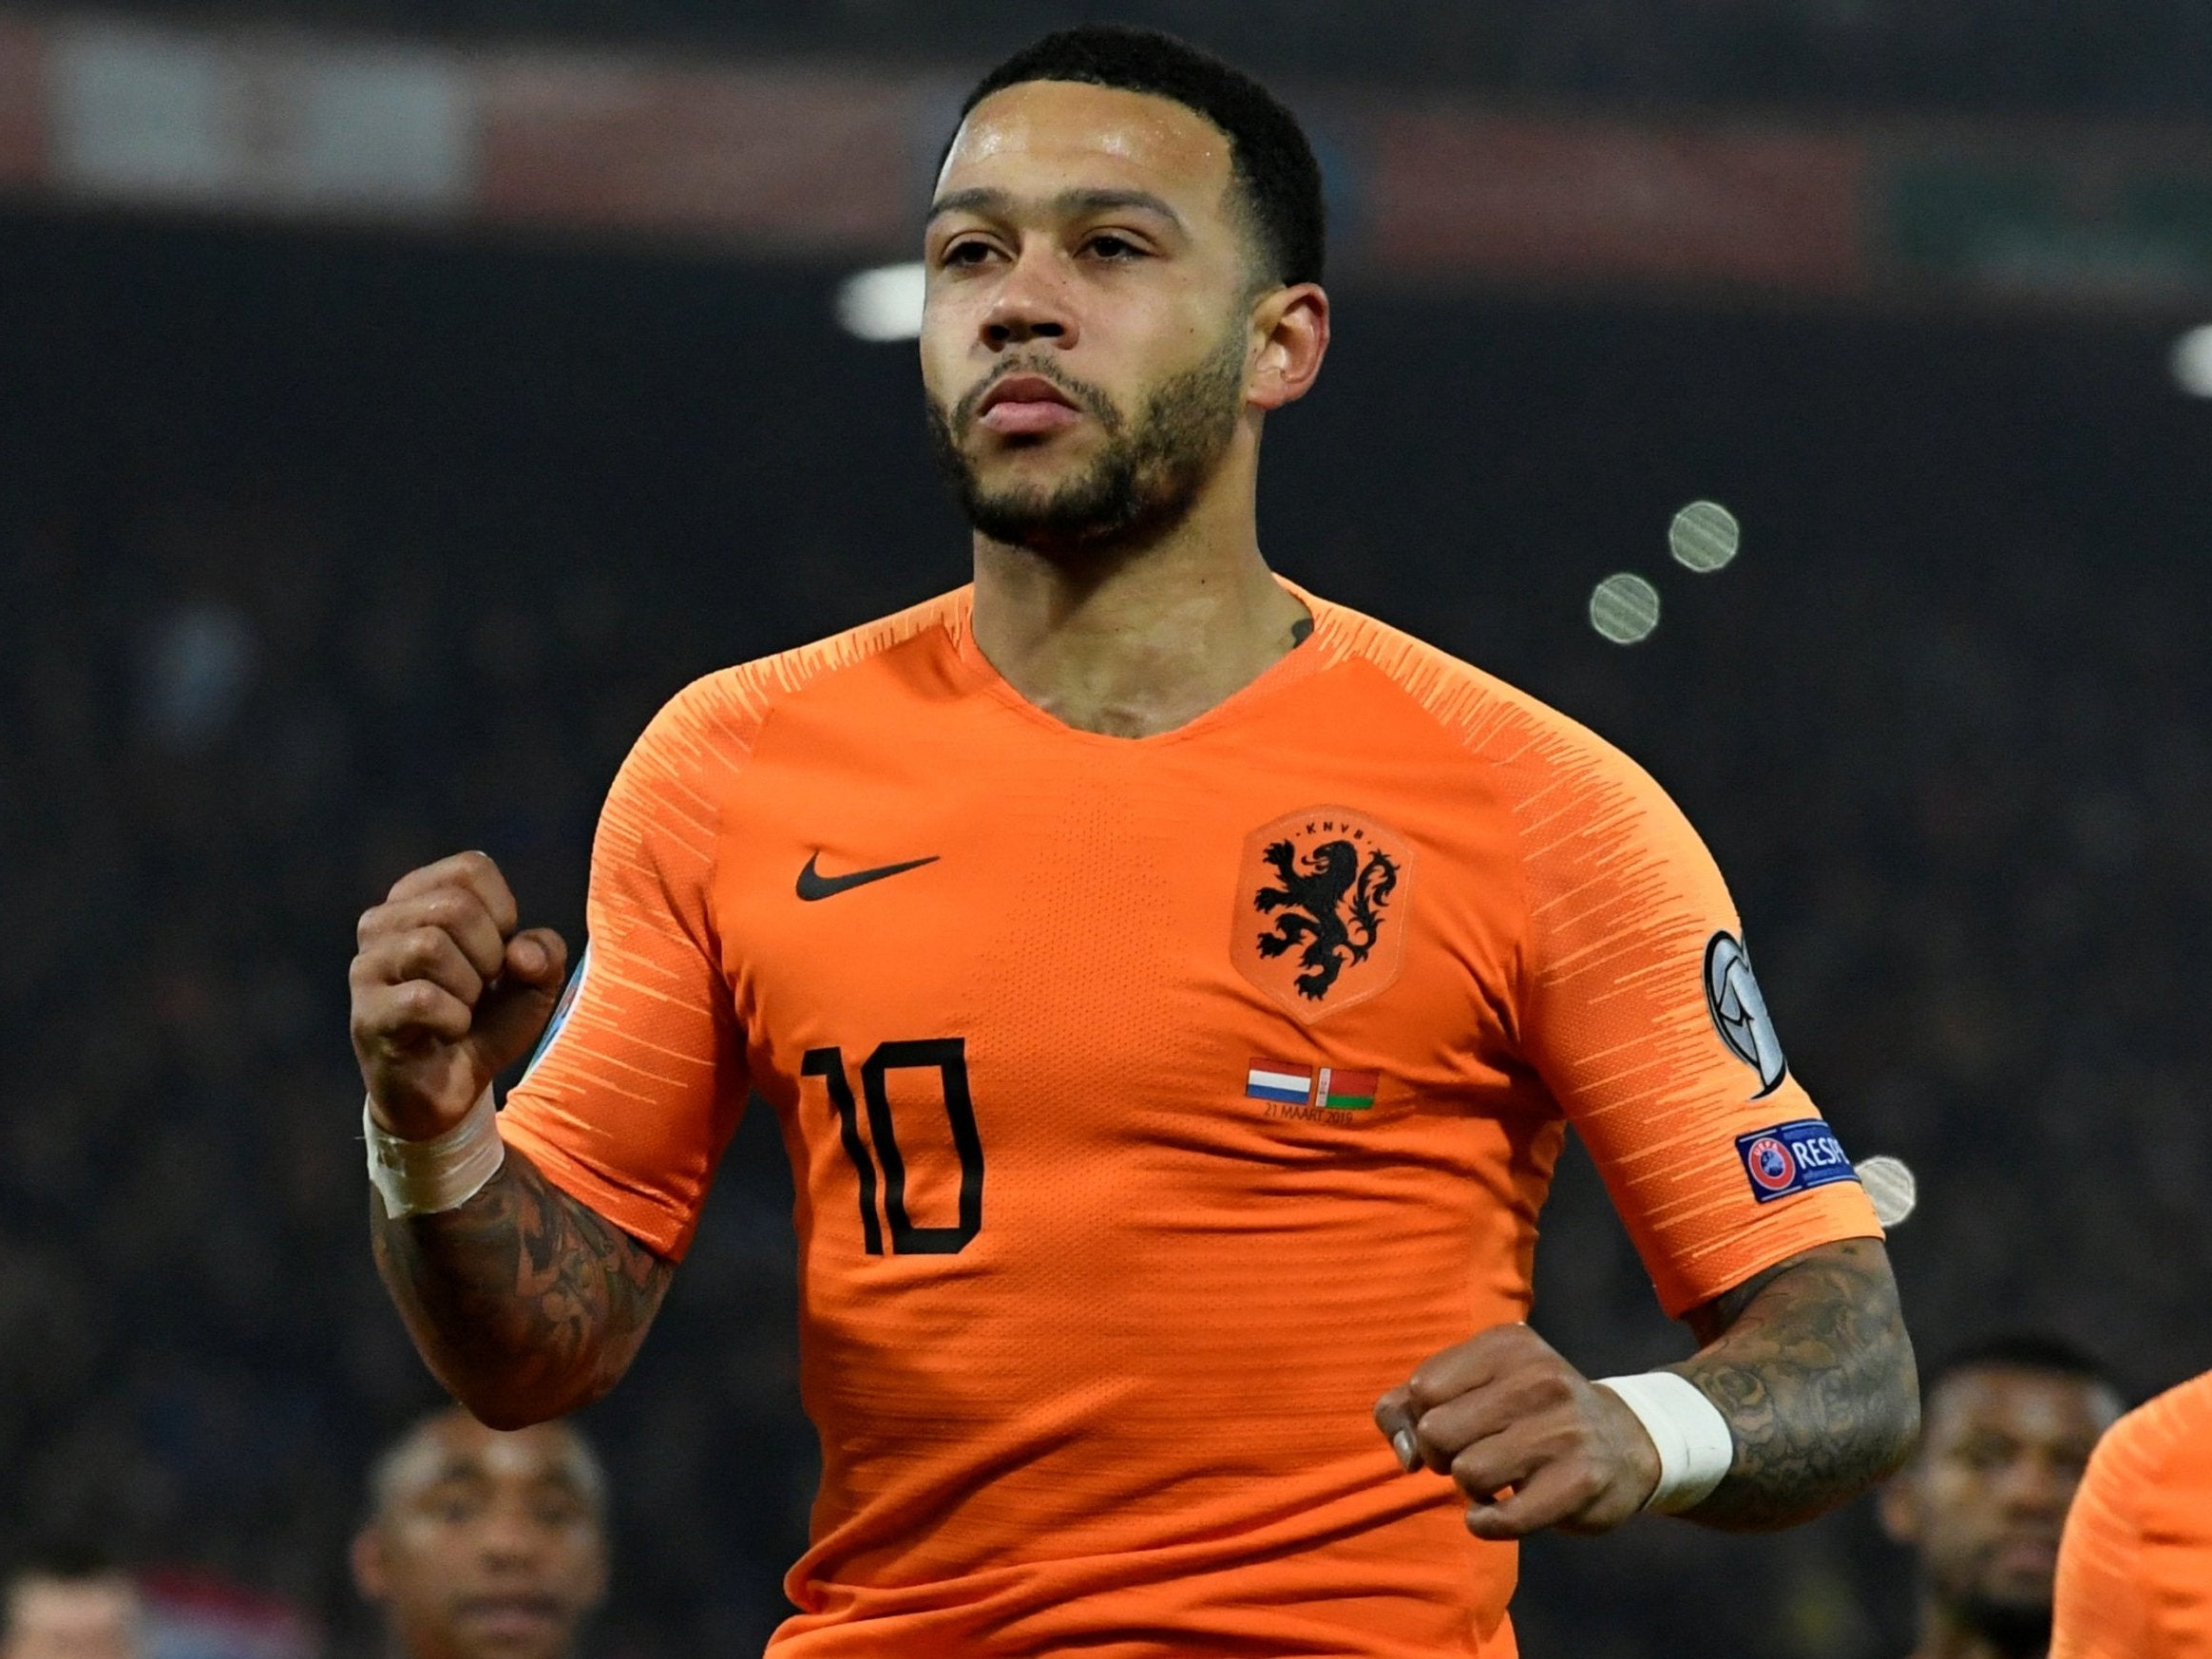 Lyon star Memphis Depay has explained the meaning behind his